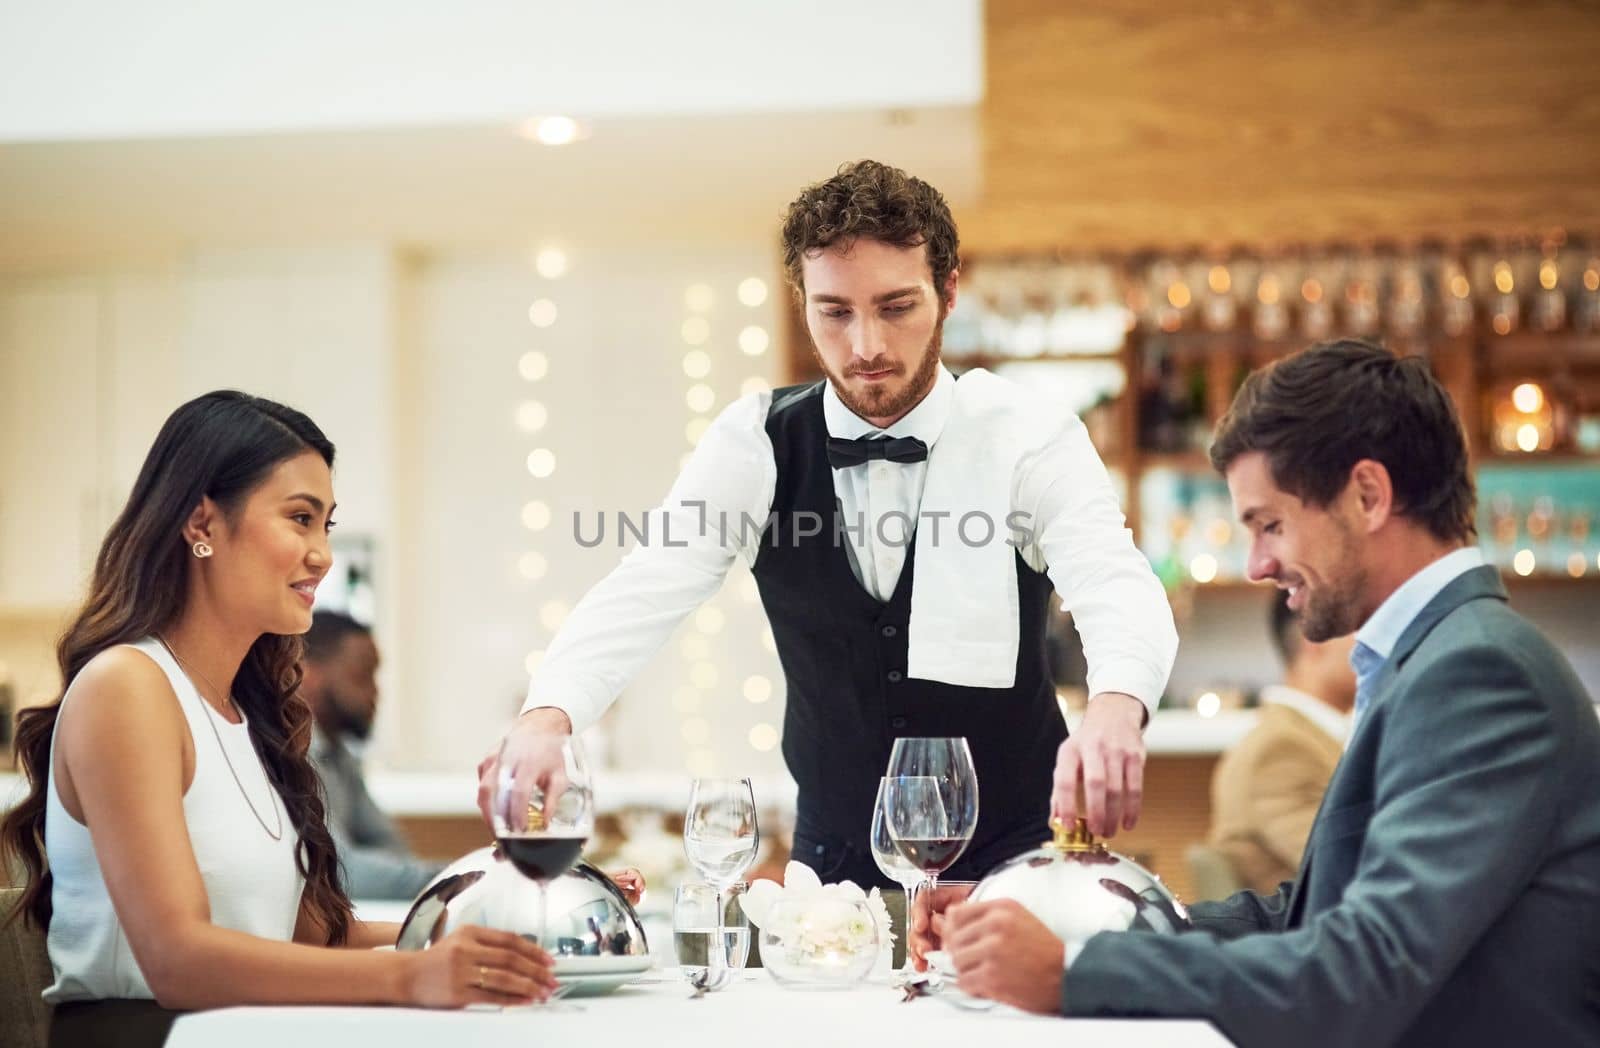 Couple, restaurant server and fine dining at table for valentines day date, bonding and romance in night. Man, woman and waiter with food, service and hospitality for dinner, love and celebration.